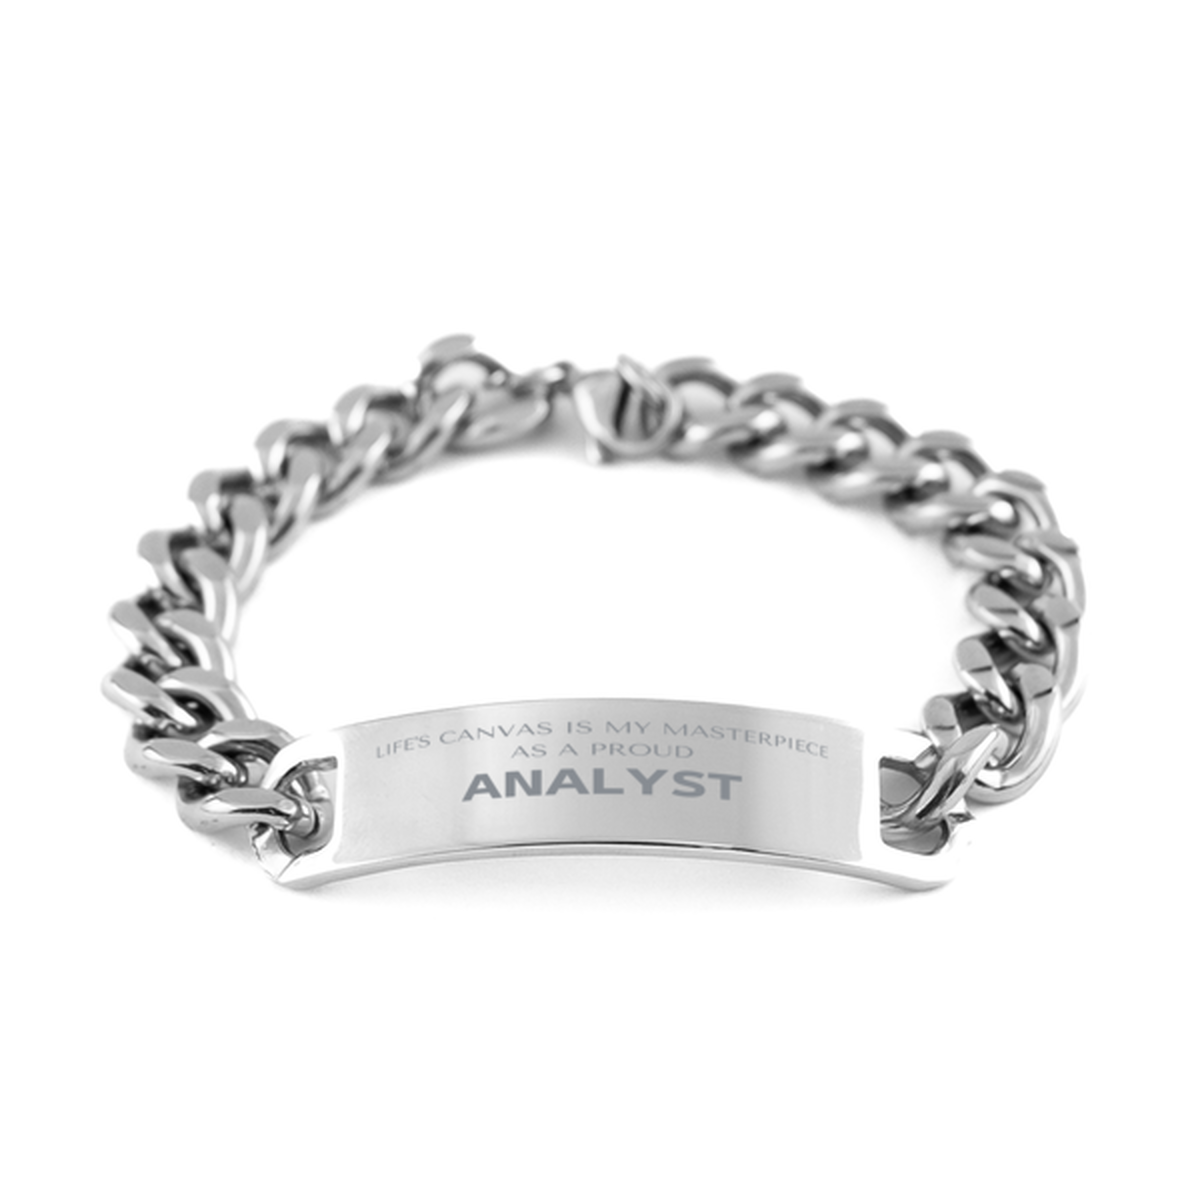 Proud Analyst Gifts, Life's canvas is my masterpiece, Epic Birthday Christmas Unique Cuban Chain Stainless Steel Bracelet For Analyst, Coworkers, Men, Women, Friends